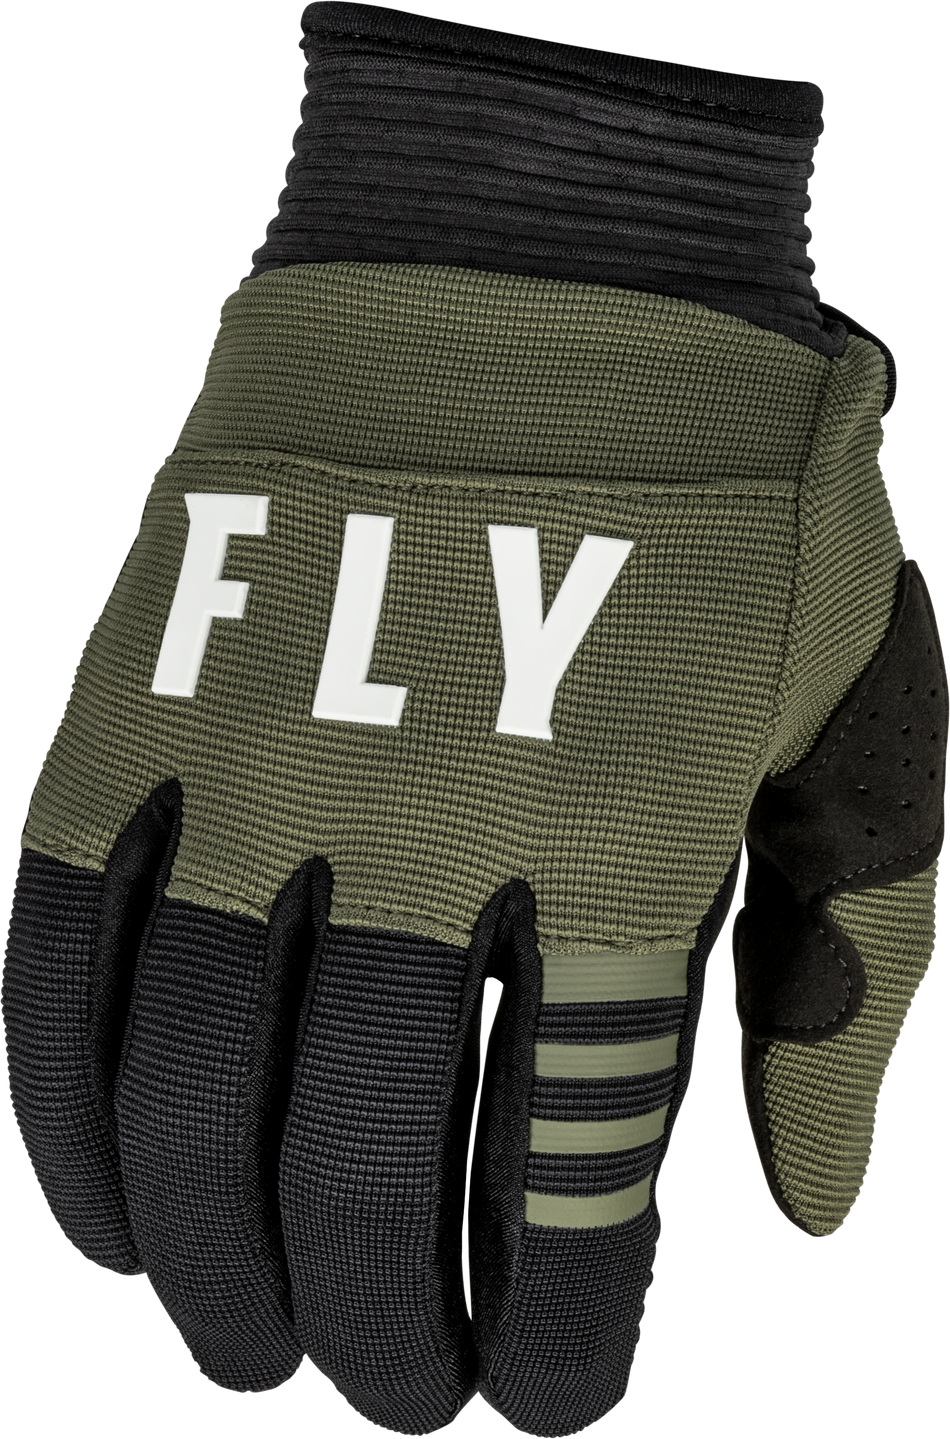 FLY RACING F-16 Gloves Olive Green/Black Md 376-913M